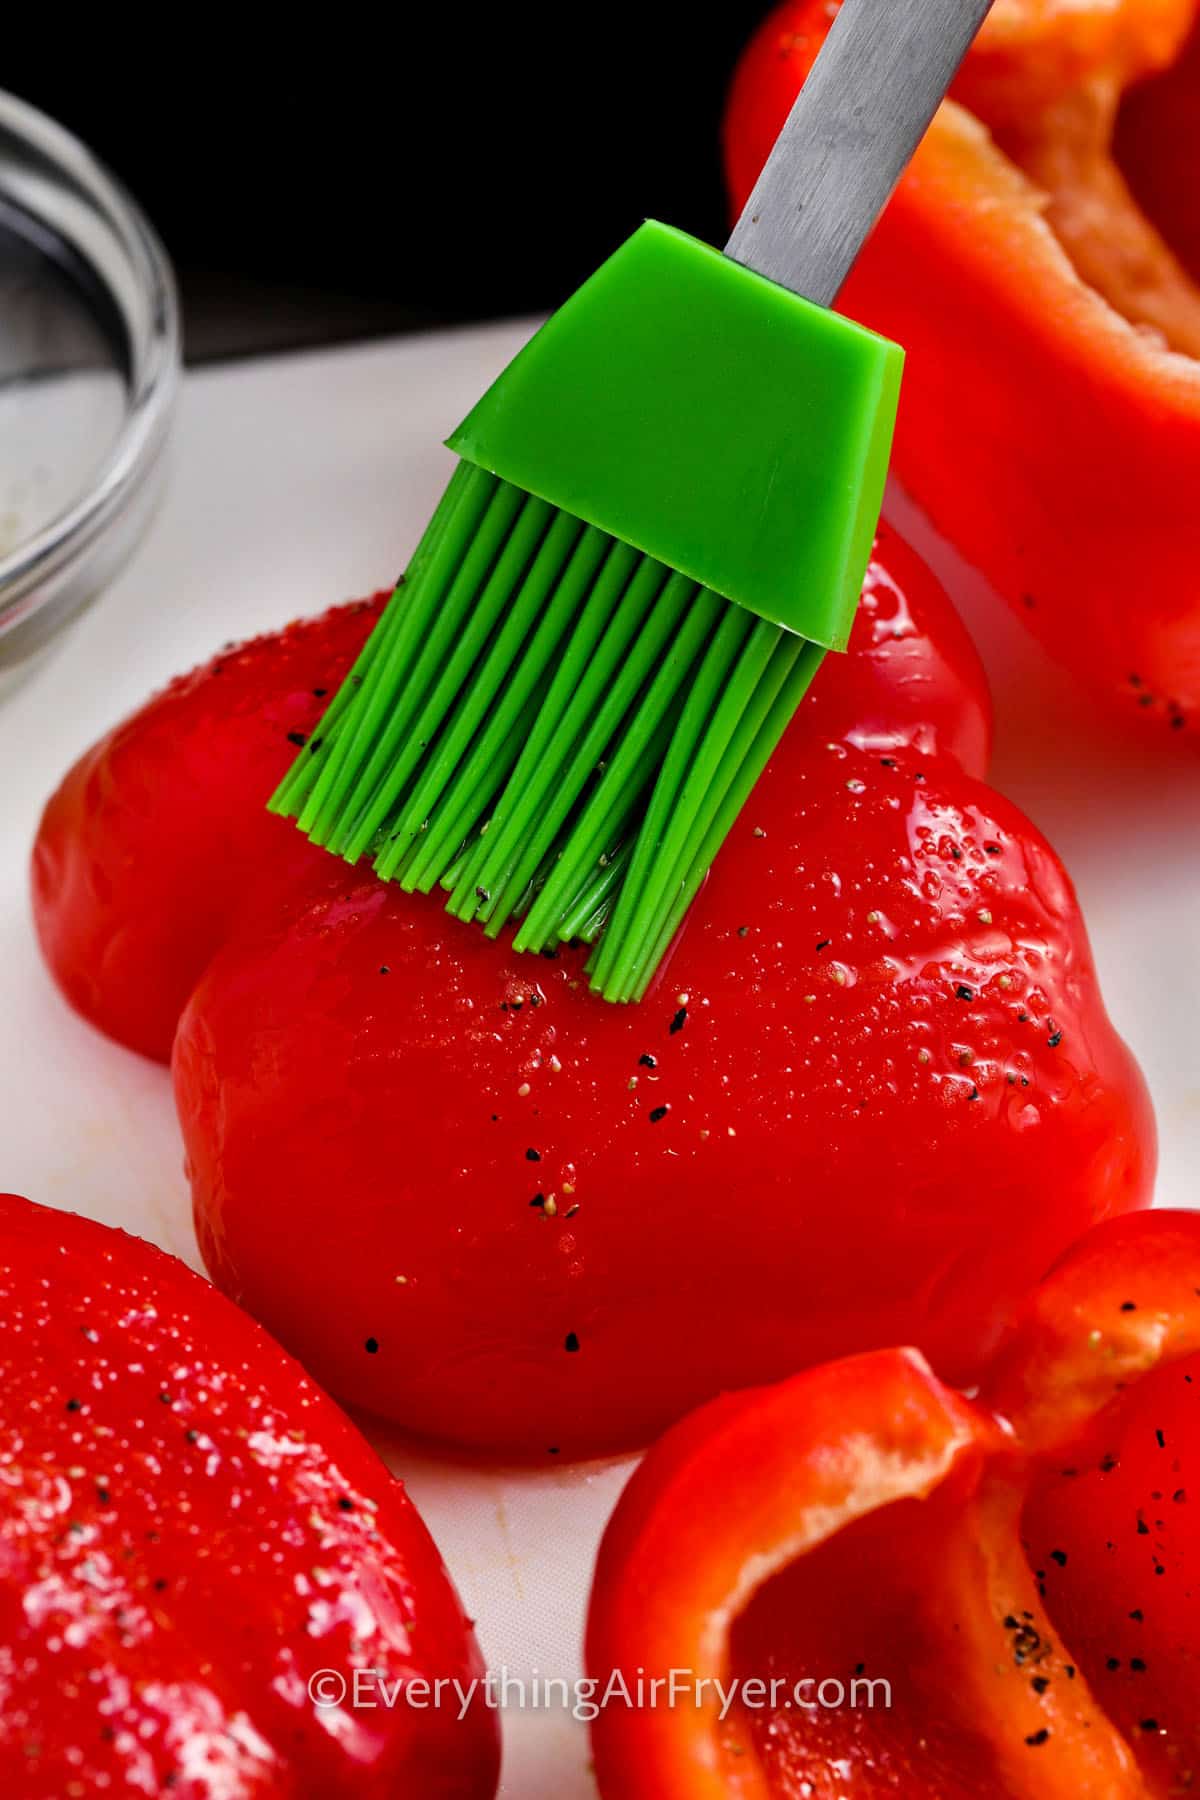 brushing butter over peppers to make Air Fryer Roasted Peppers